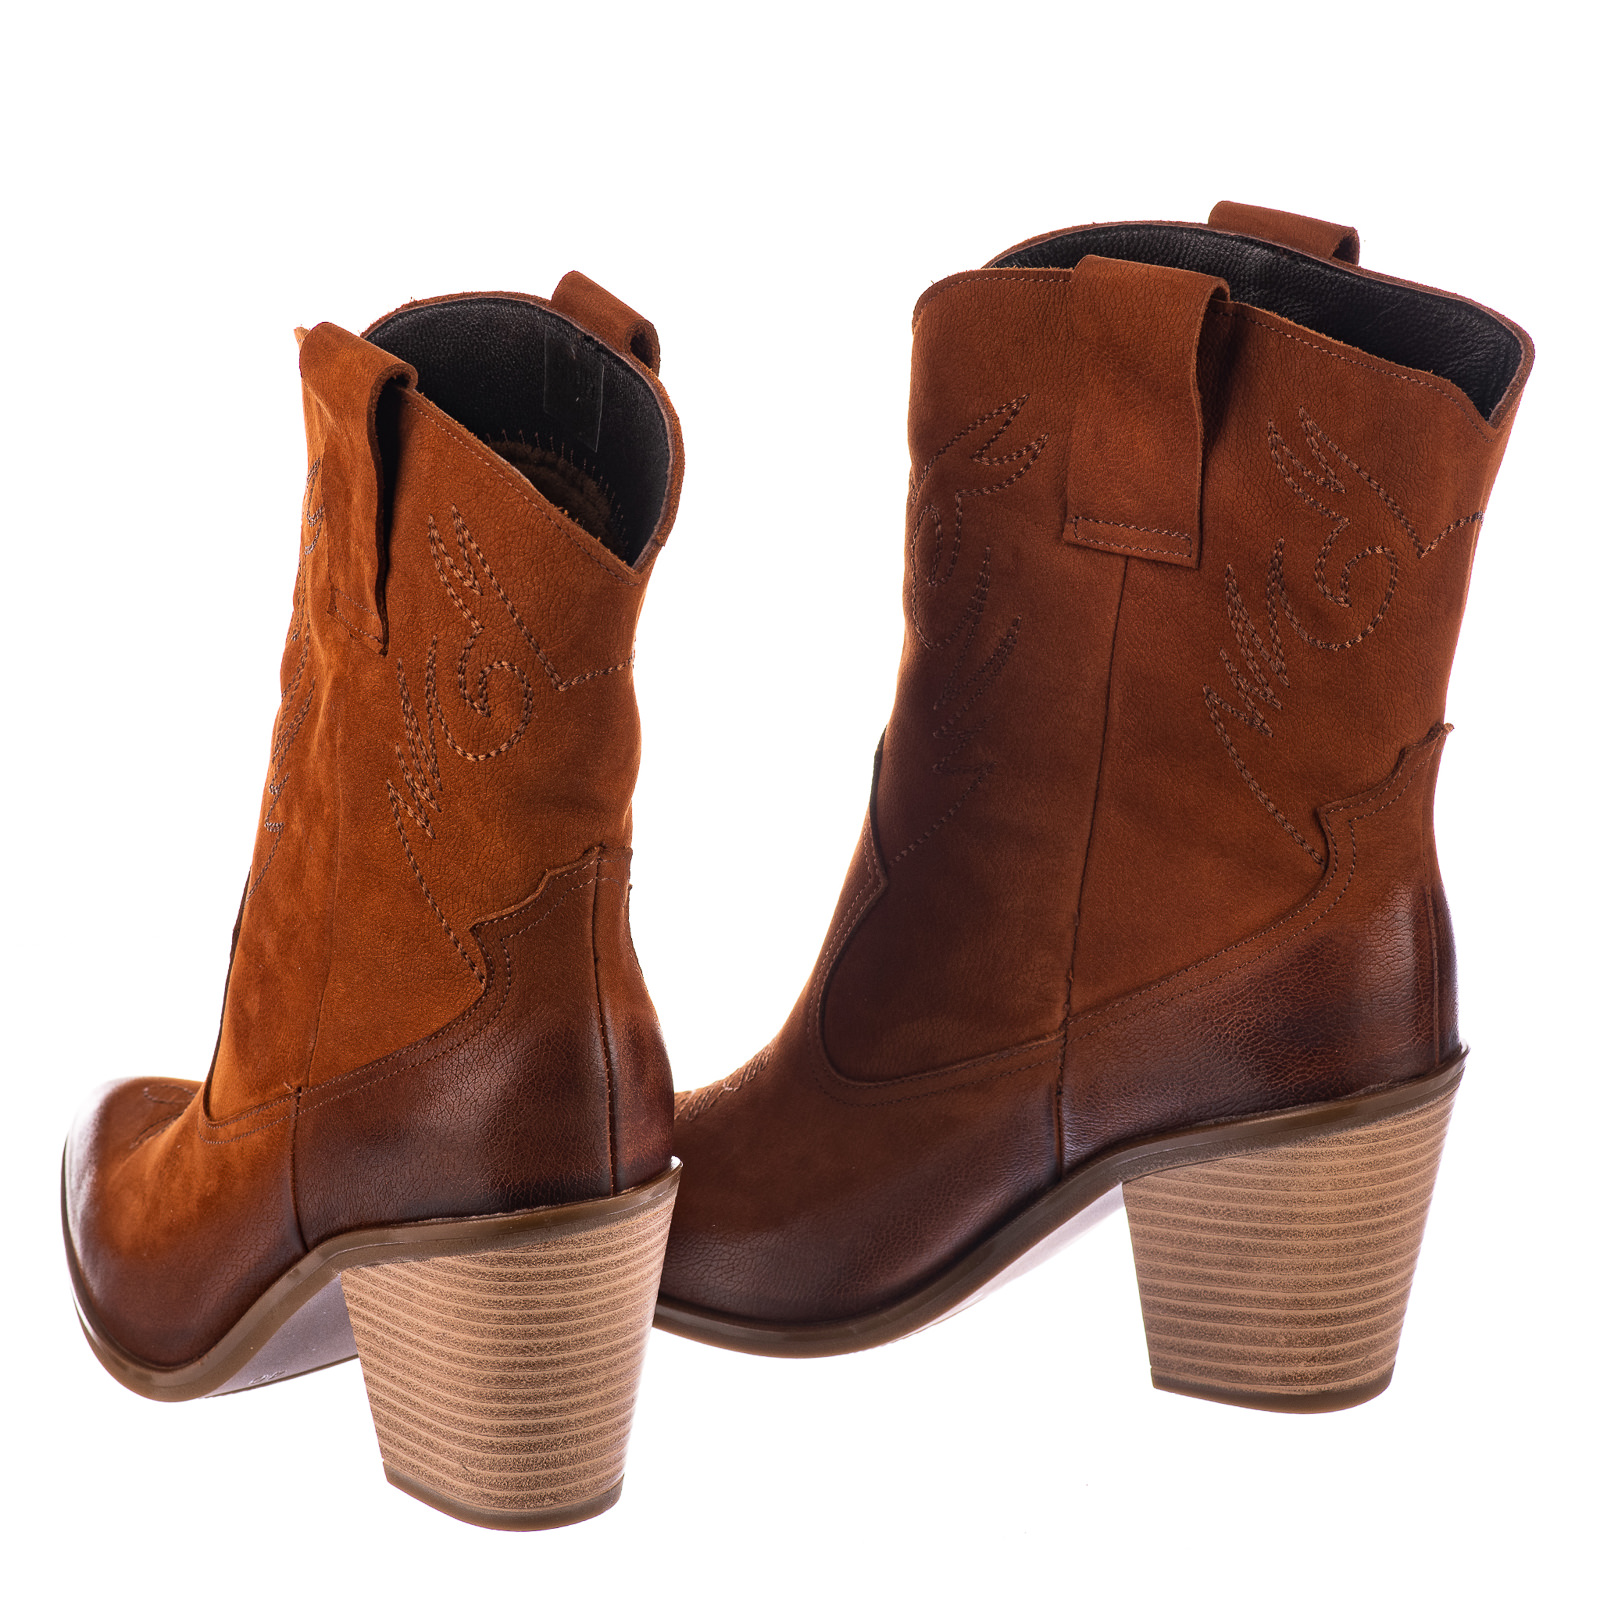 Leather ankle boots B677 - CAMEL